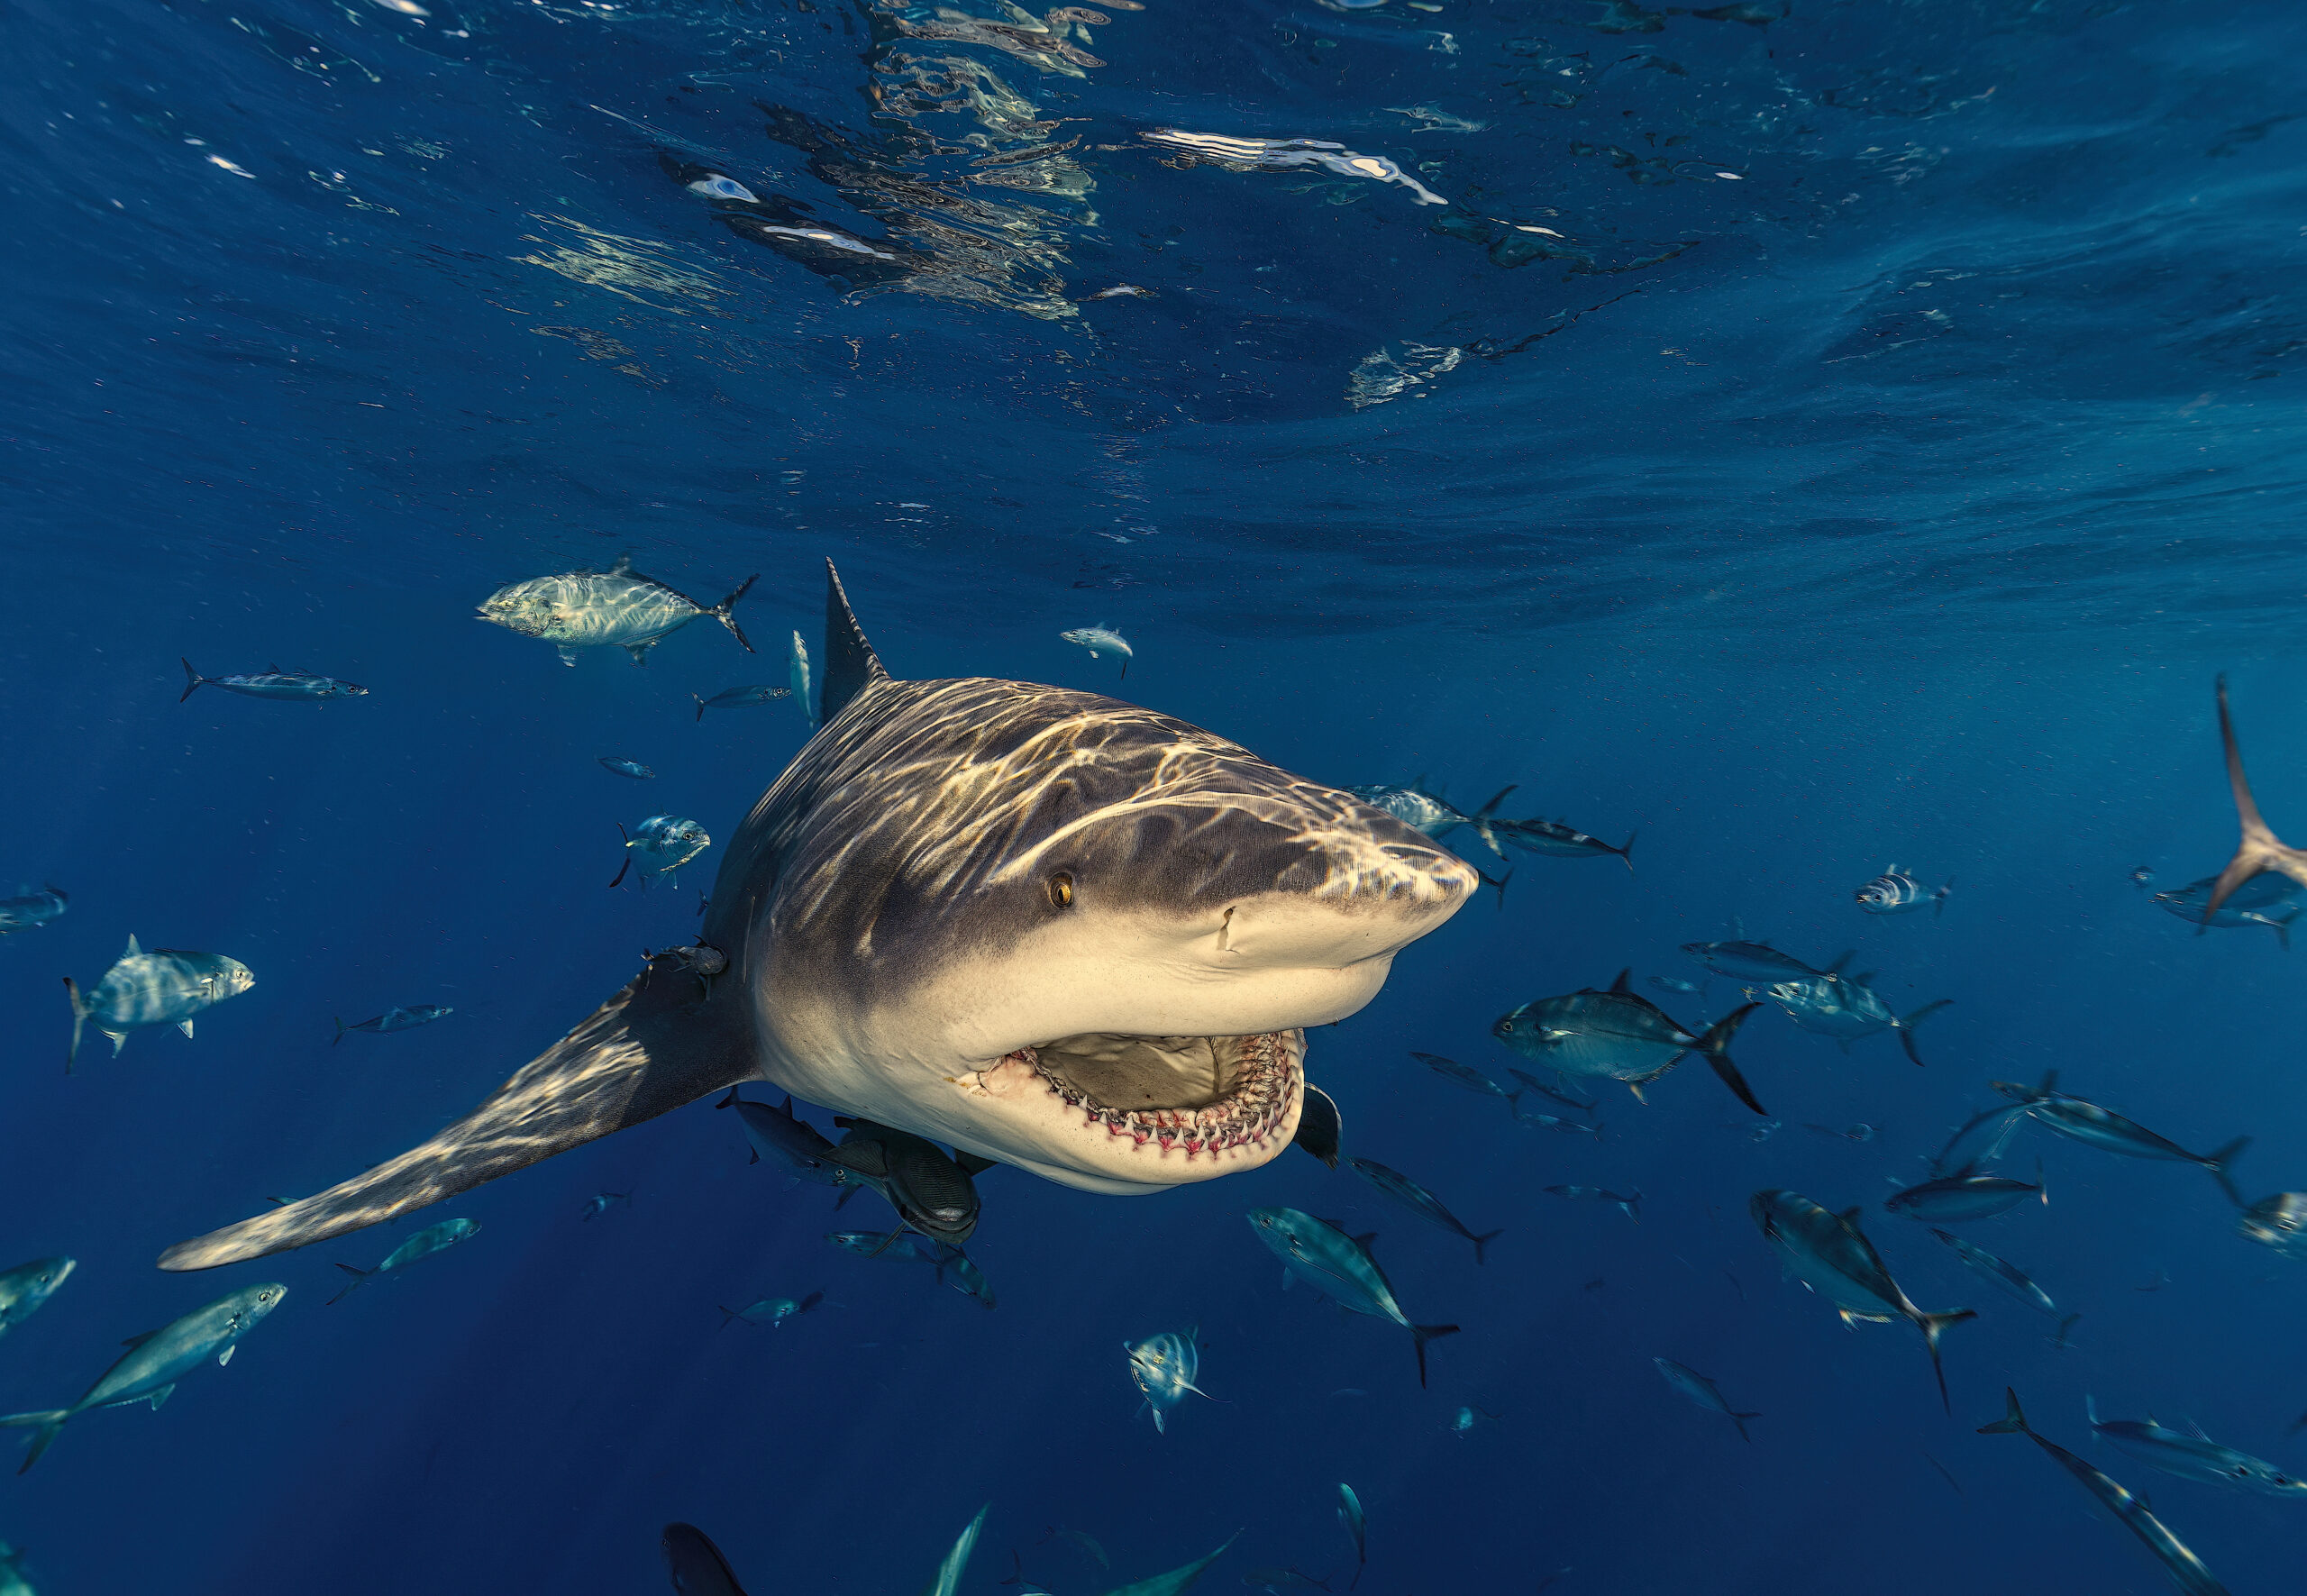 Bull shark with open mouth in blue water below the surface.